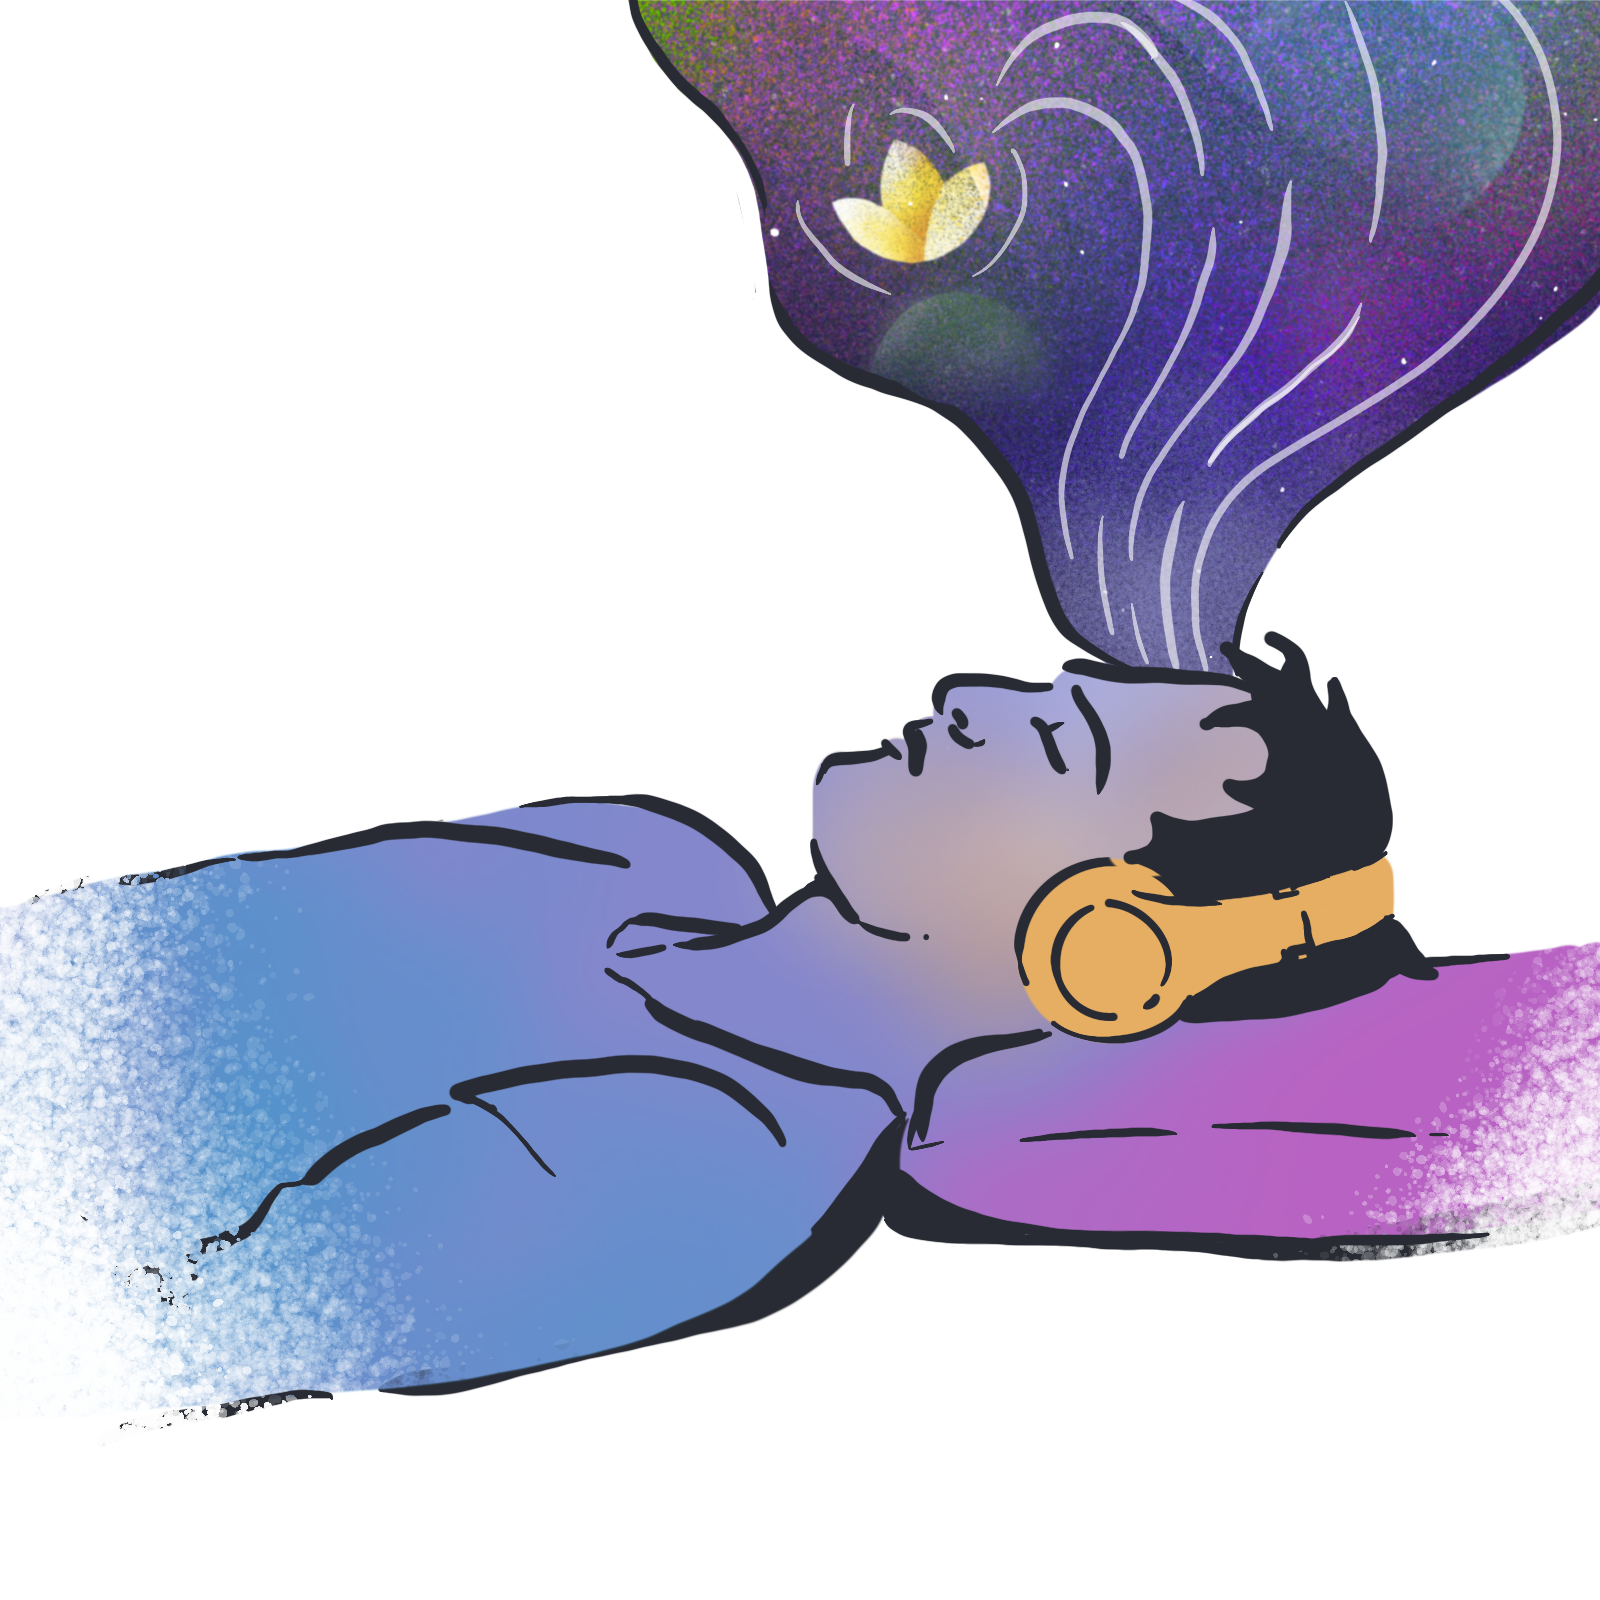 An illustration of a man wearing headphones listening to a guided meditation.